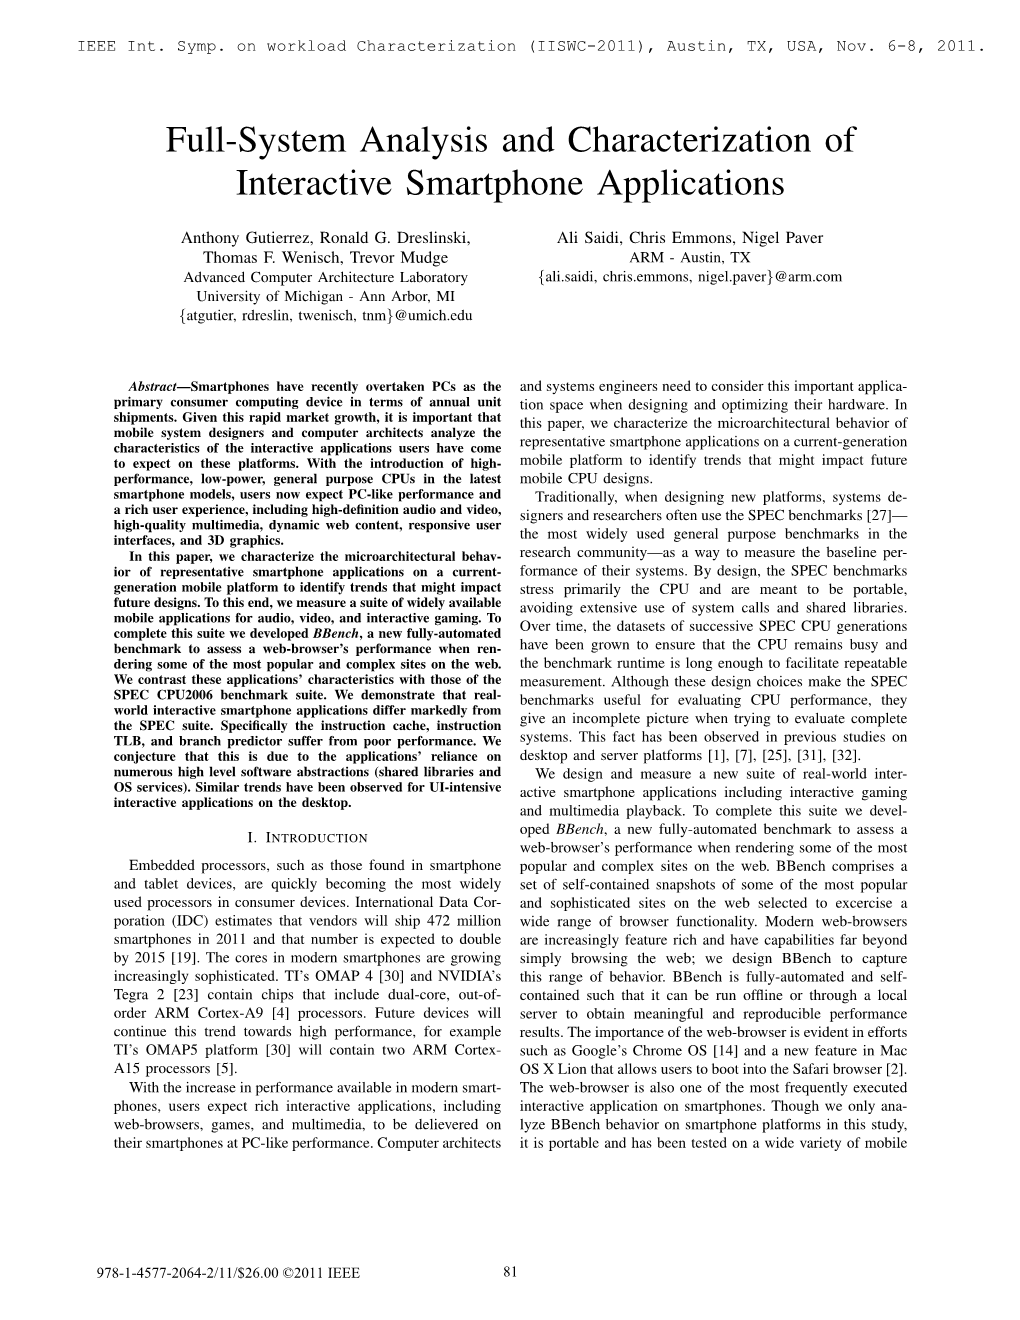 Full-System Analysis and Characterization of Interactive Smartphone Applications